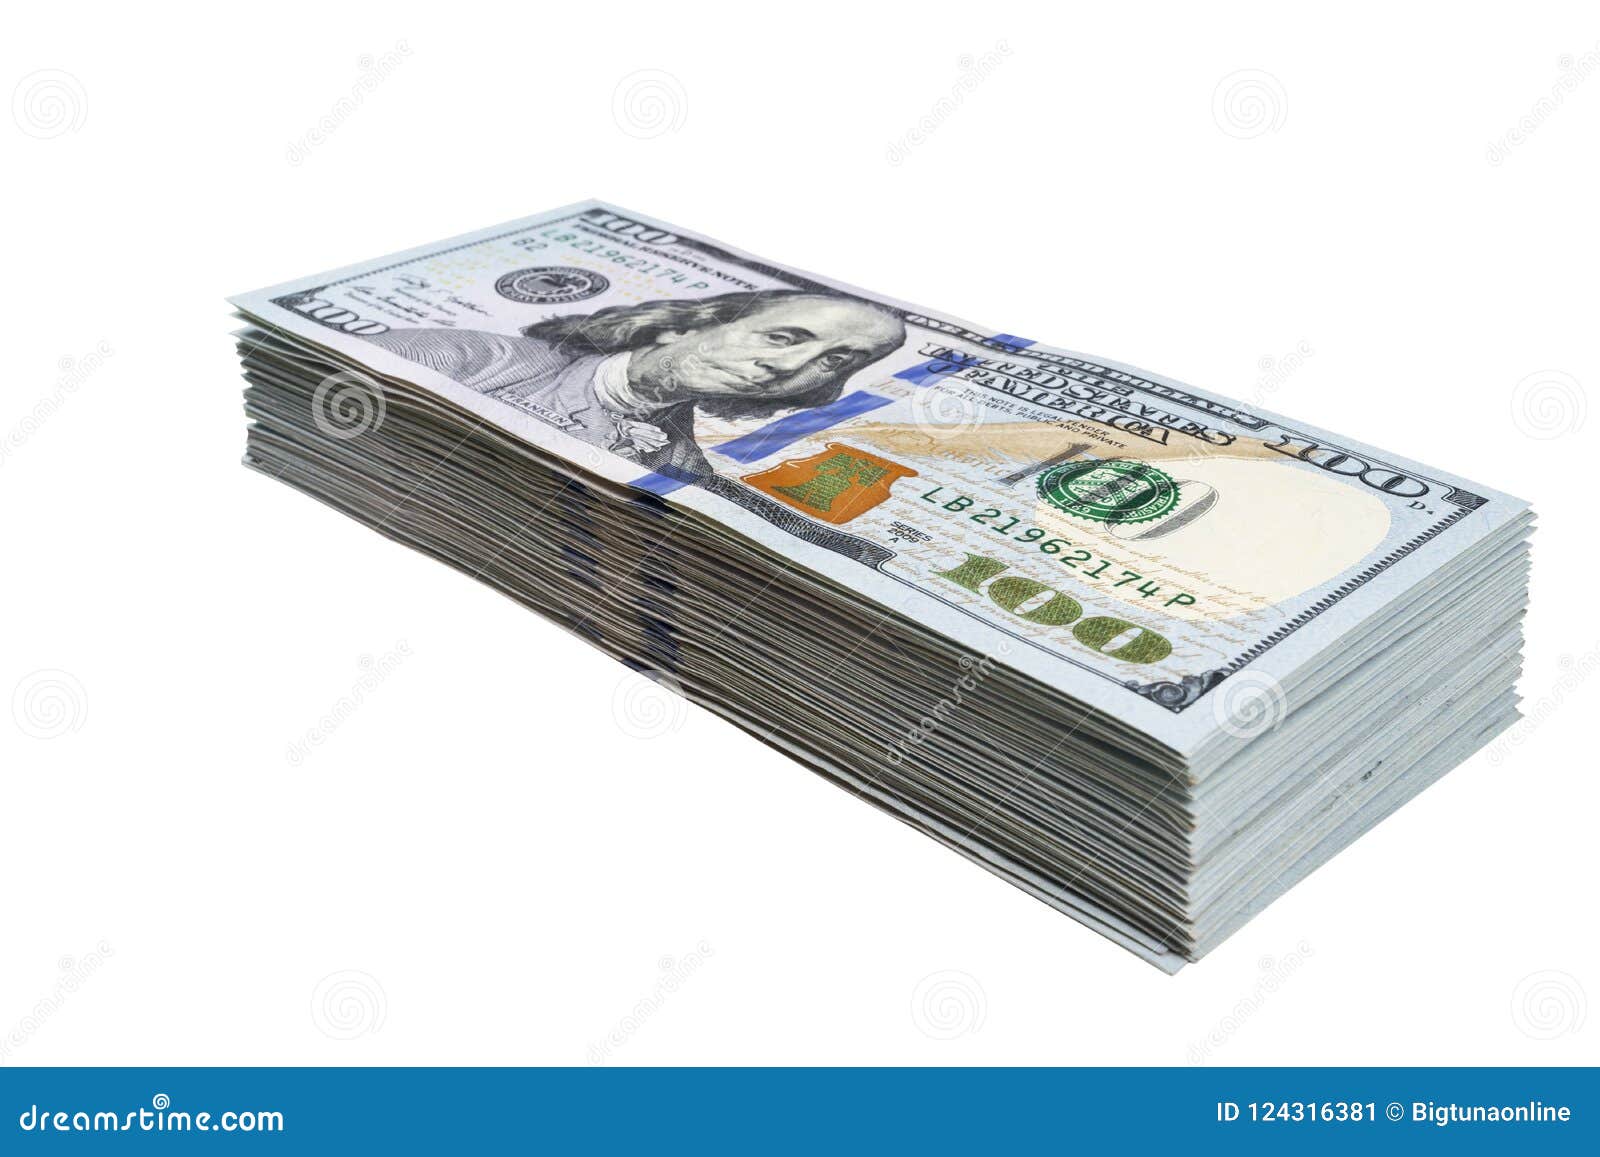 CASH MONEY STACK GLOSSY POSTER PICTURE PHOTO BANNER PRINT 100 dollar bills 5675 